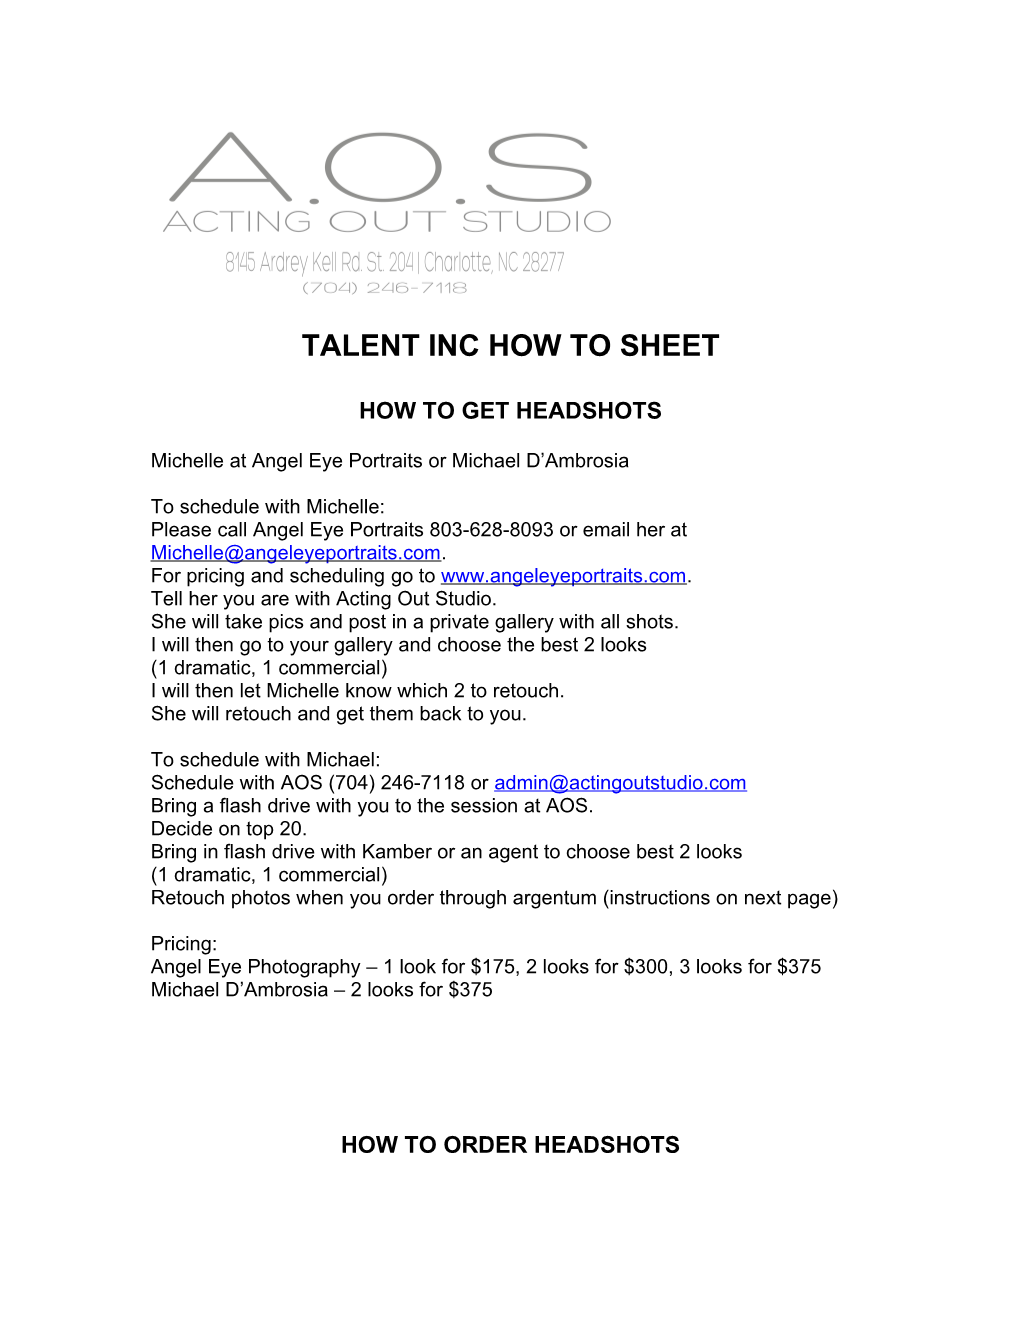 Talent Inc How to Sheet